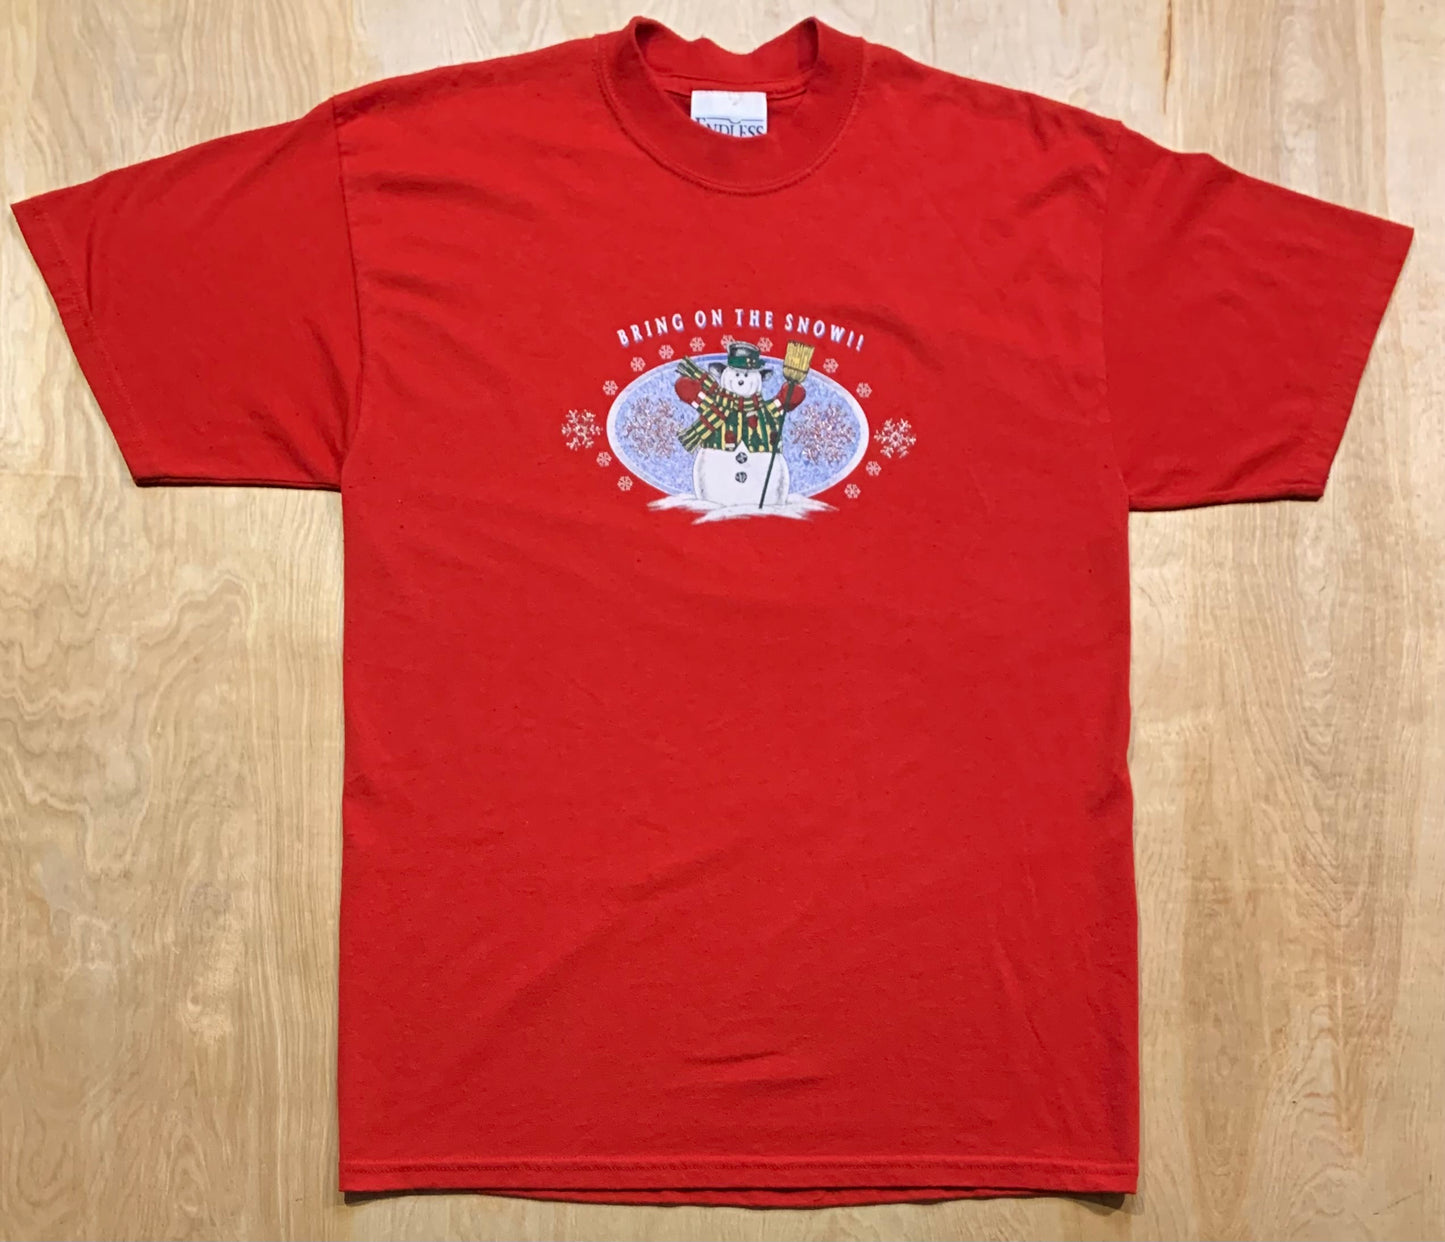 90's Endless Designs "Bring On The Snow" T-Shirt